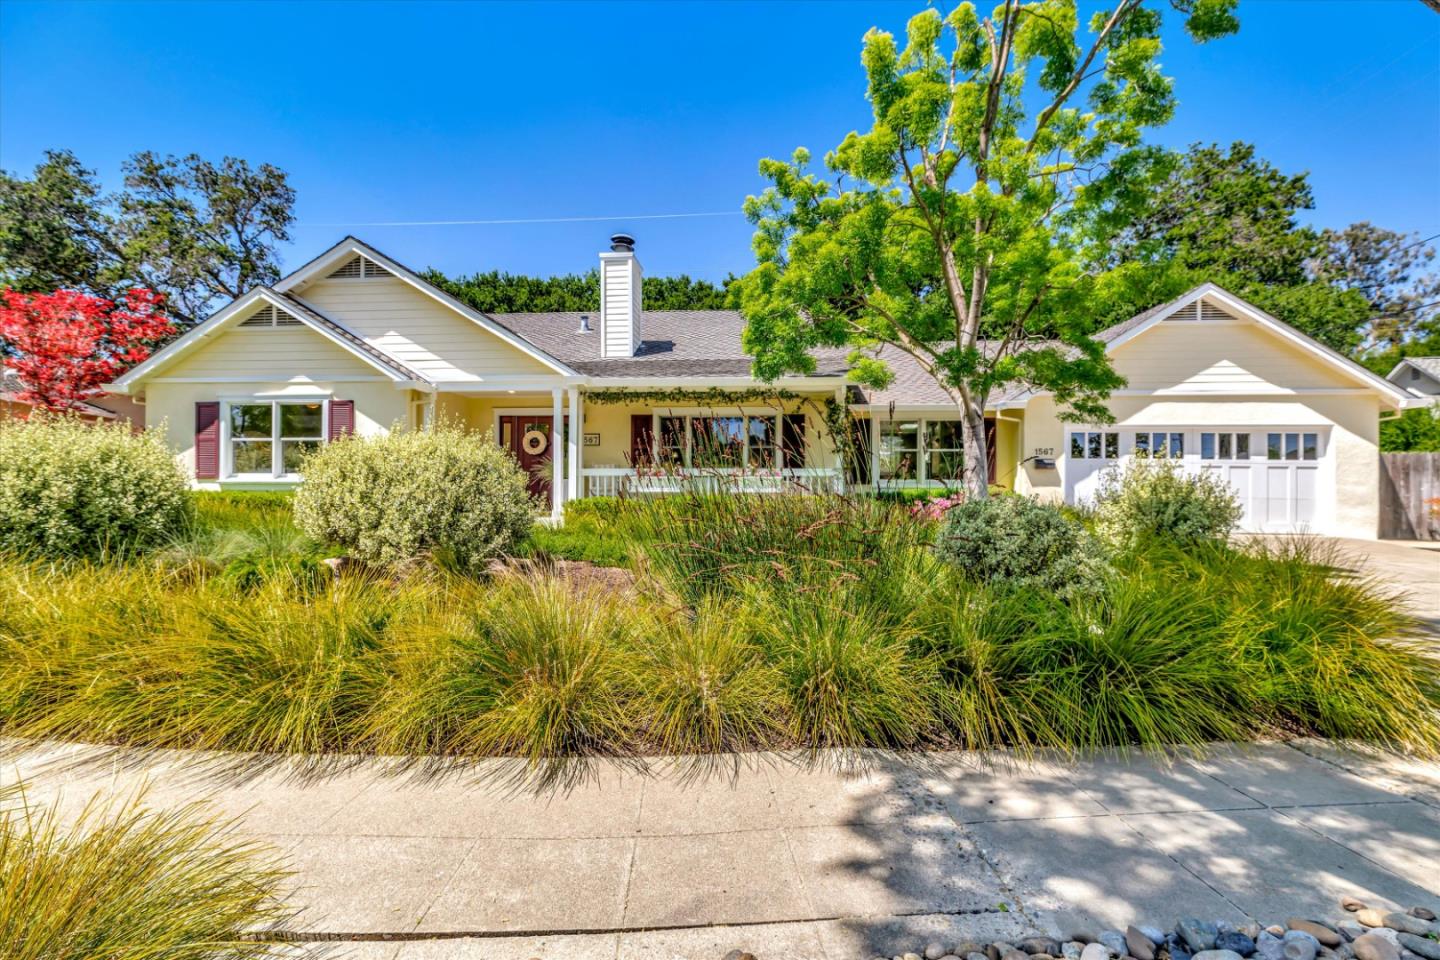 Photo of 1567 Ashcroft Wy in Sunnyvale, CA